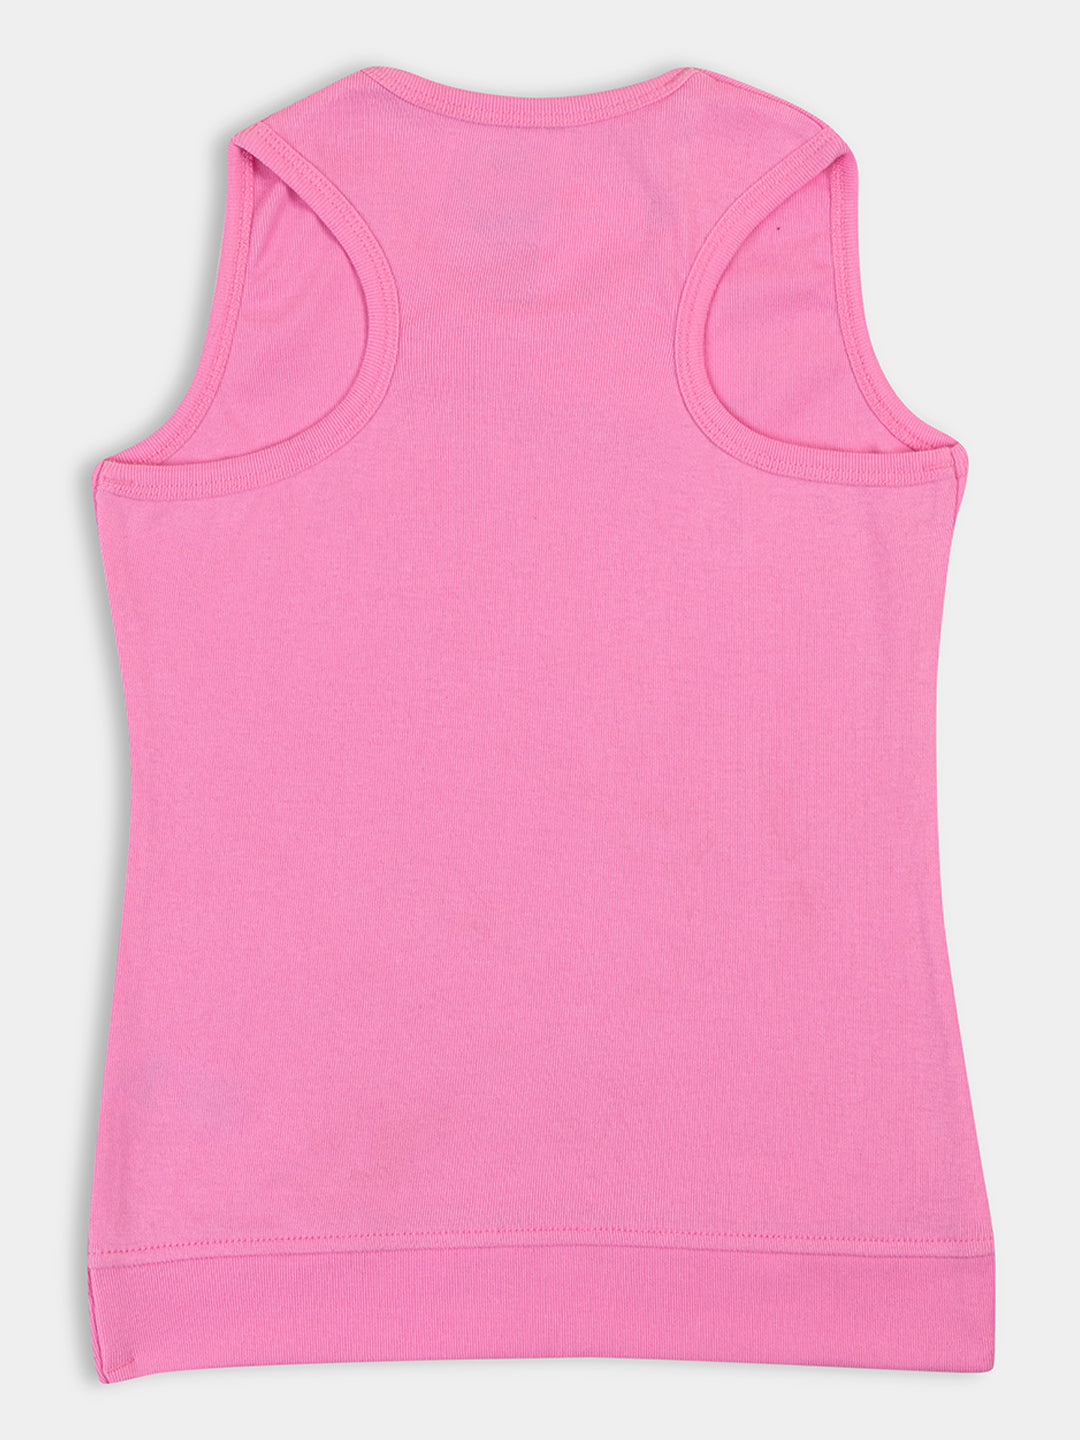 Adorable Girls' Sleeveless Top 3-Combo: Solid Colors